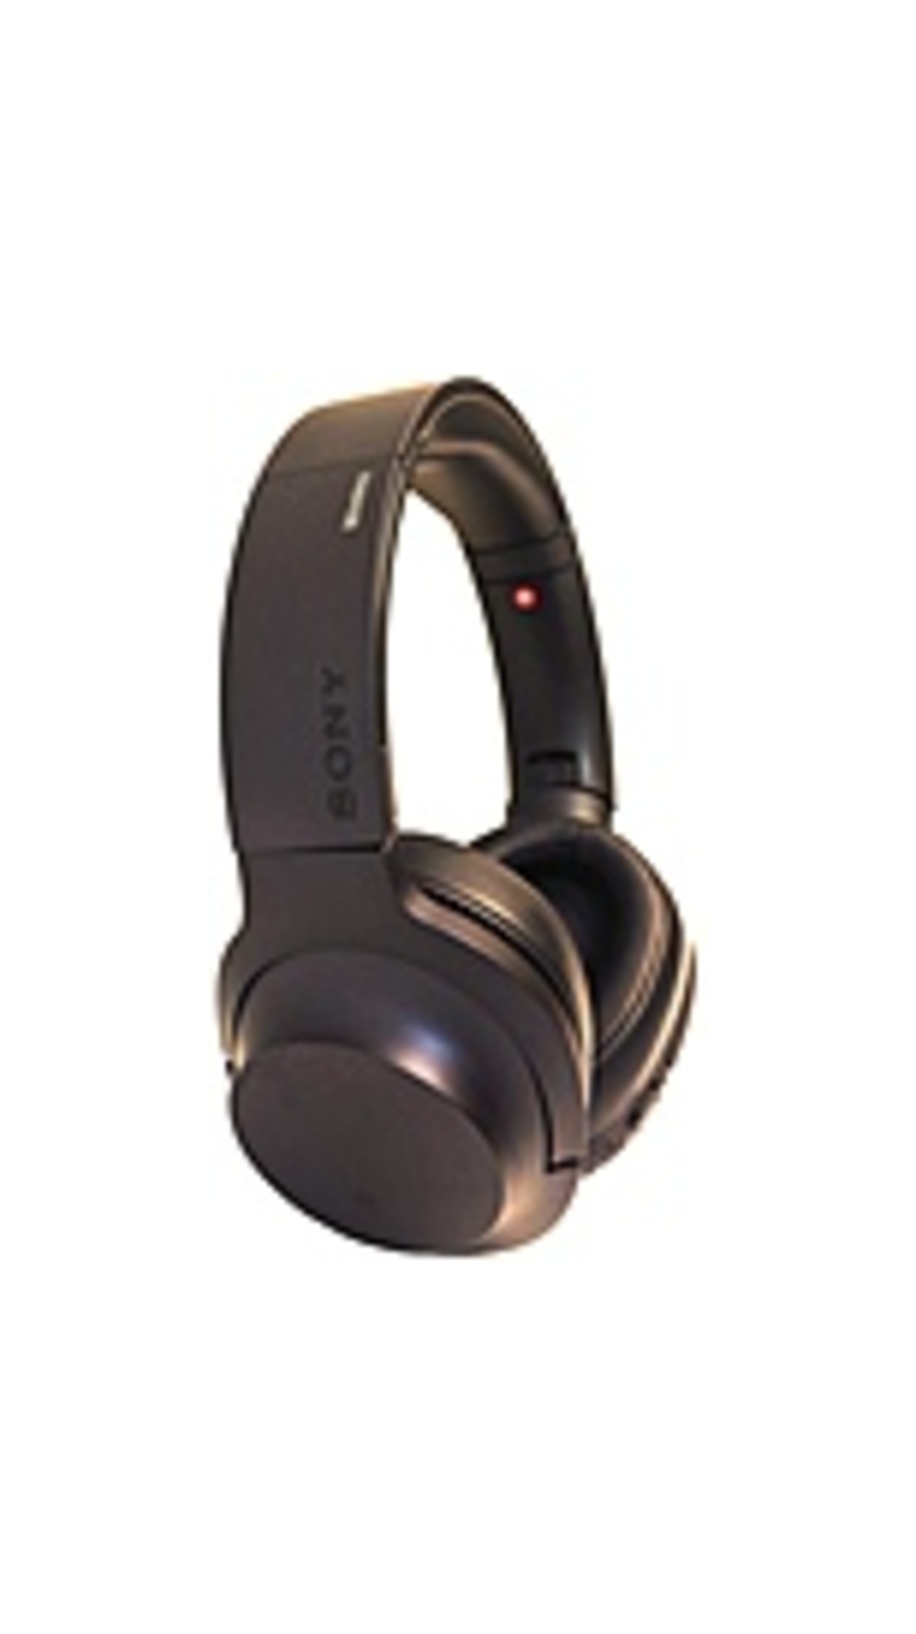 SONY MDR-100ABN/B H.Ear Bluetooth Noise-Canceling Wireless Headphone With Mic - NFC - Black